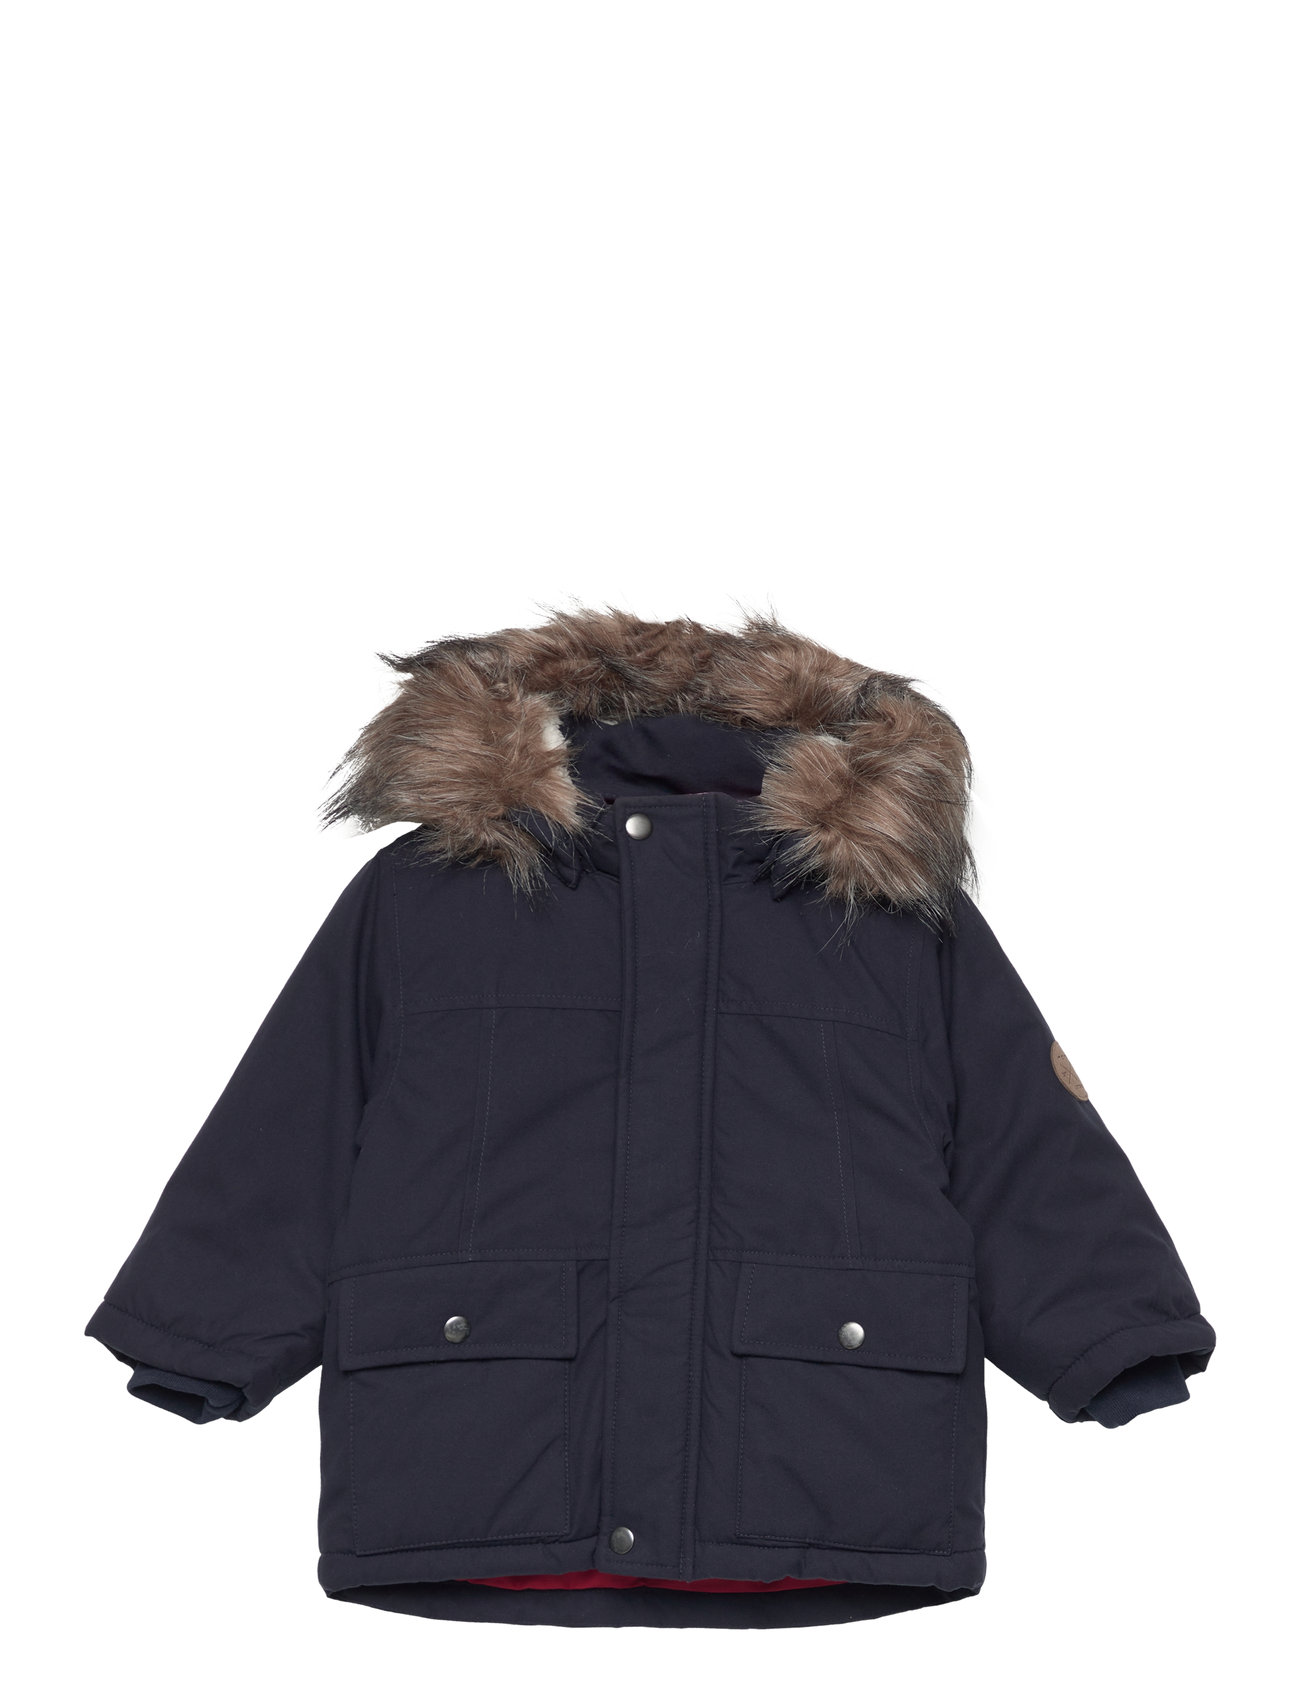 Fast name Pb it Parka from Nmmmarlin name €. Buy returns Fo at Jacket online Parkas delivery 27.50 it Boozt.com. - easy and